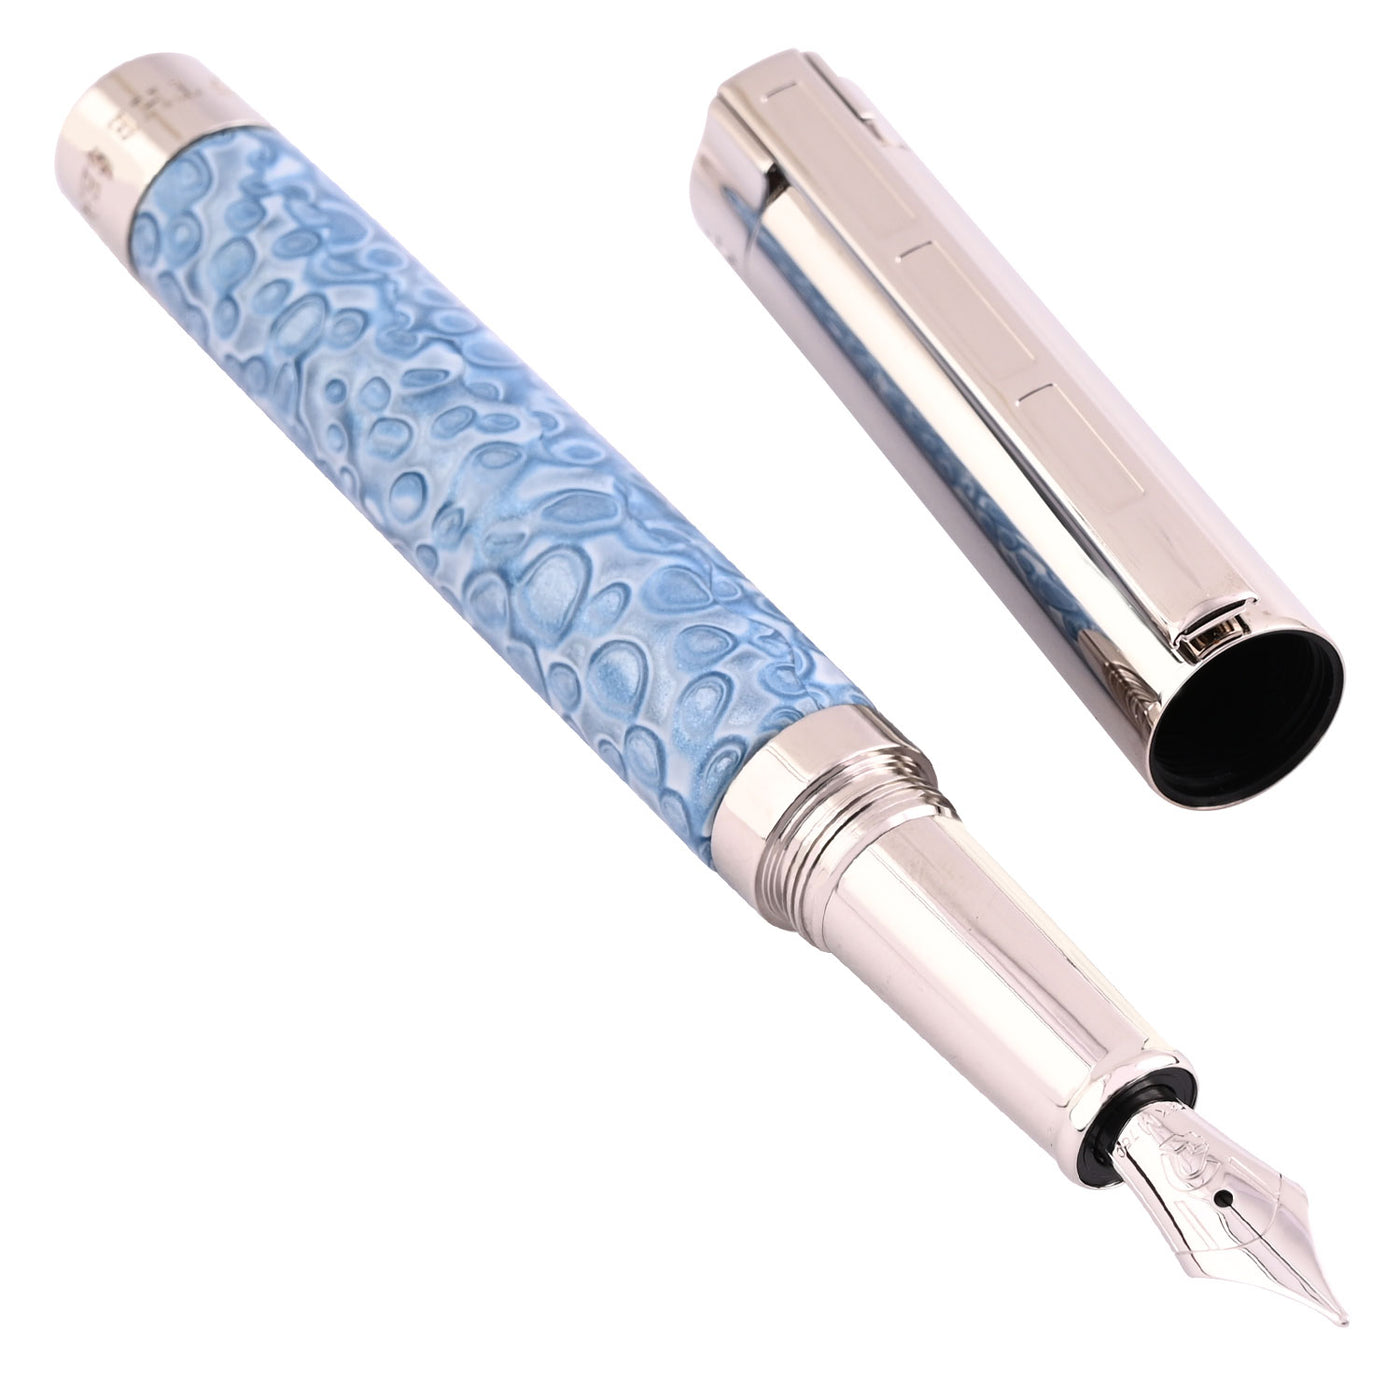 Staedtler Premium Pen of the Season Fountain Pen - Blue CT (Limited Edition) 3